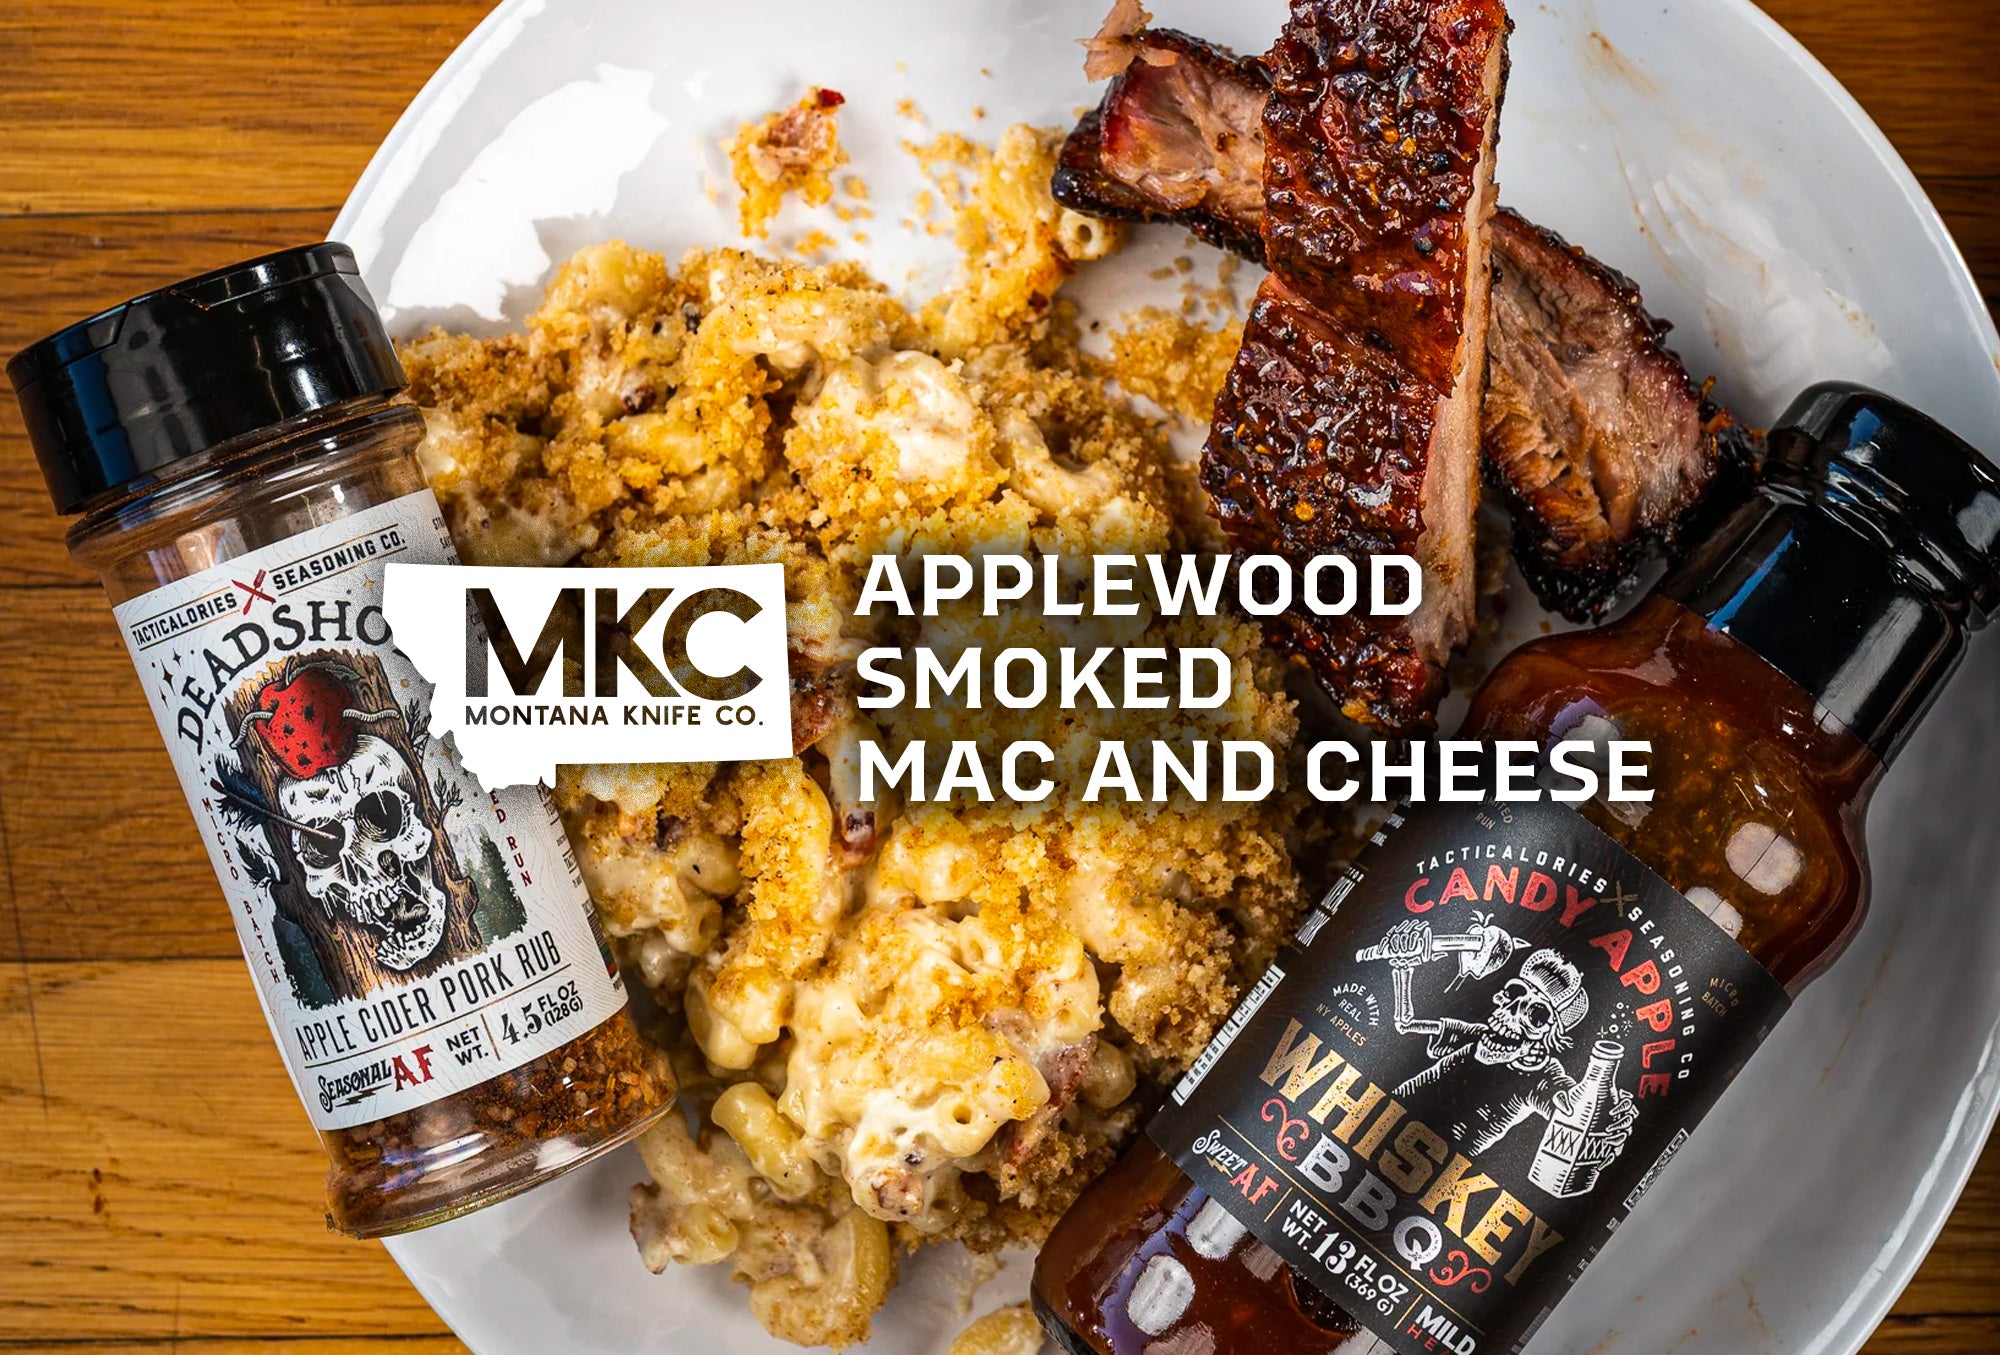 A white plate holds applewood smoked mac and cheese alongside 2 ribs and Tacticalories’ Deadshot Apple Cider Pork Rub. 